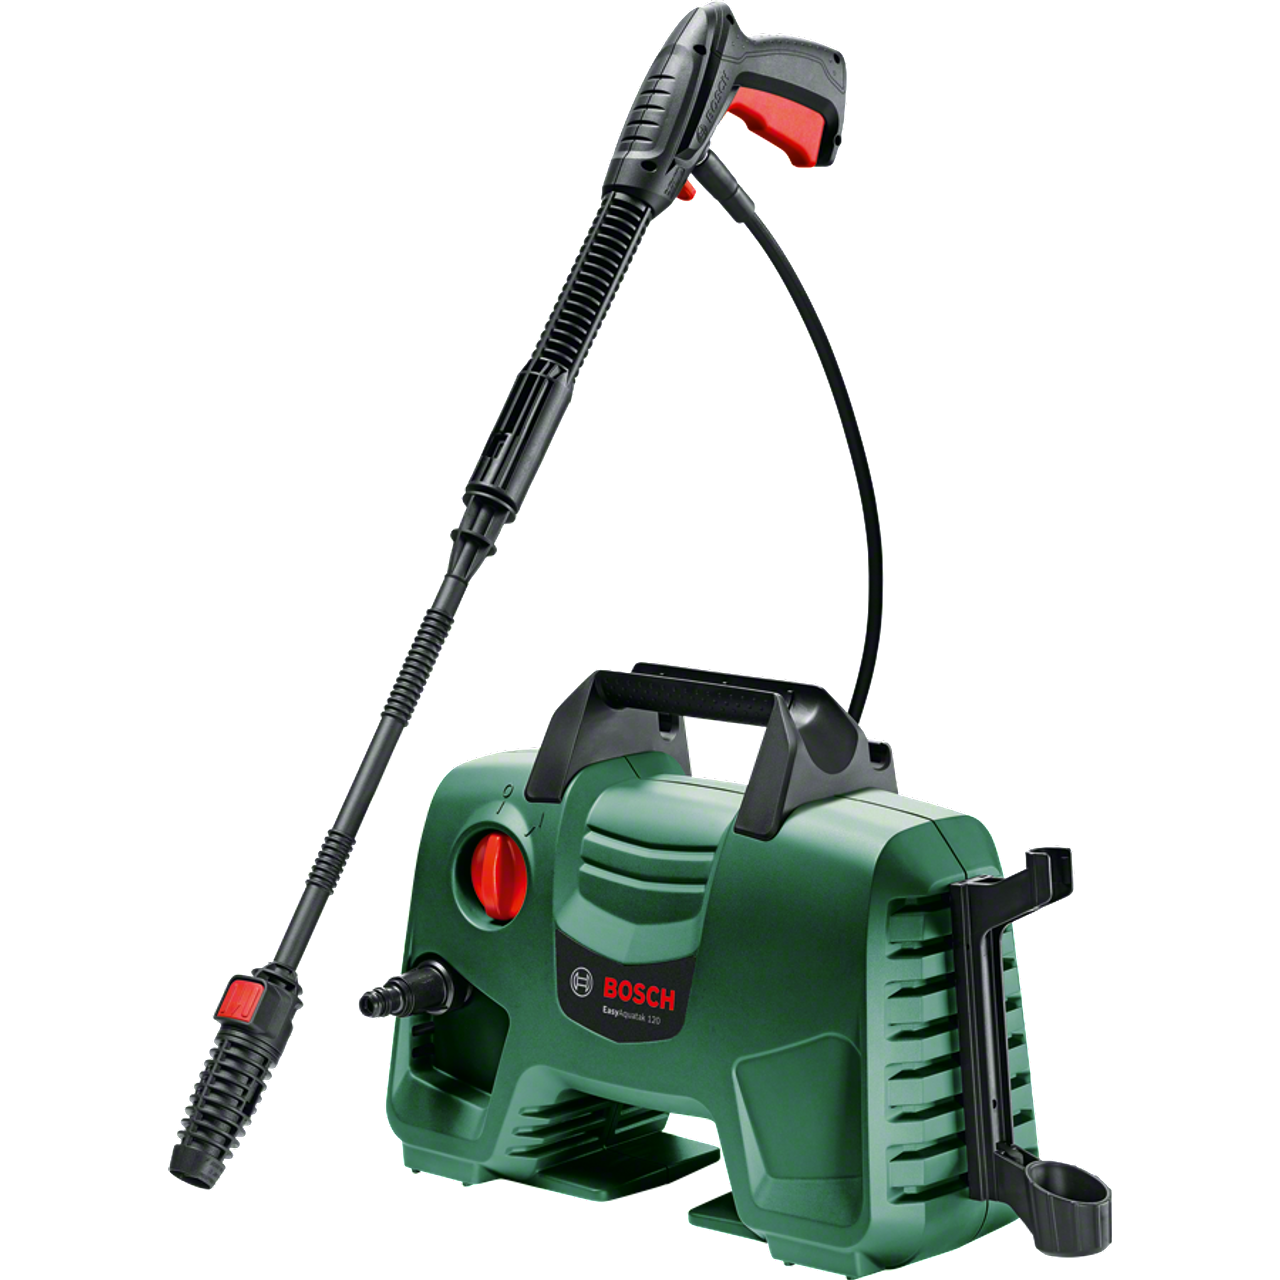 Bosch EasyAquatak 120 (+Home and Car Wash Kit) Pressure Washer Review